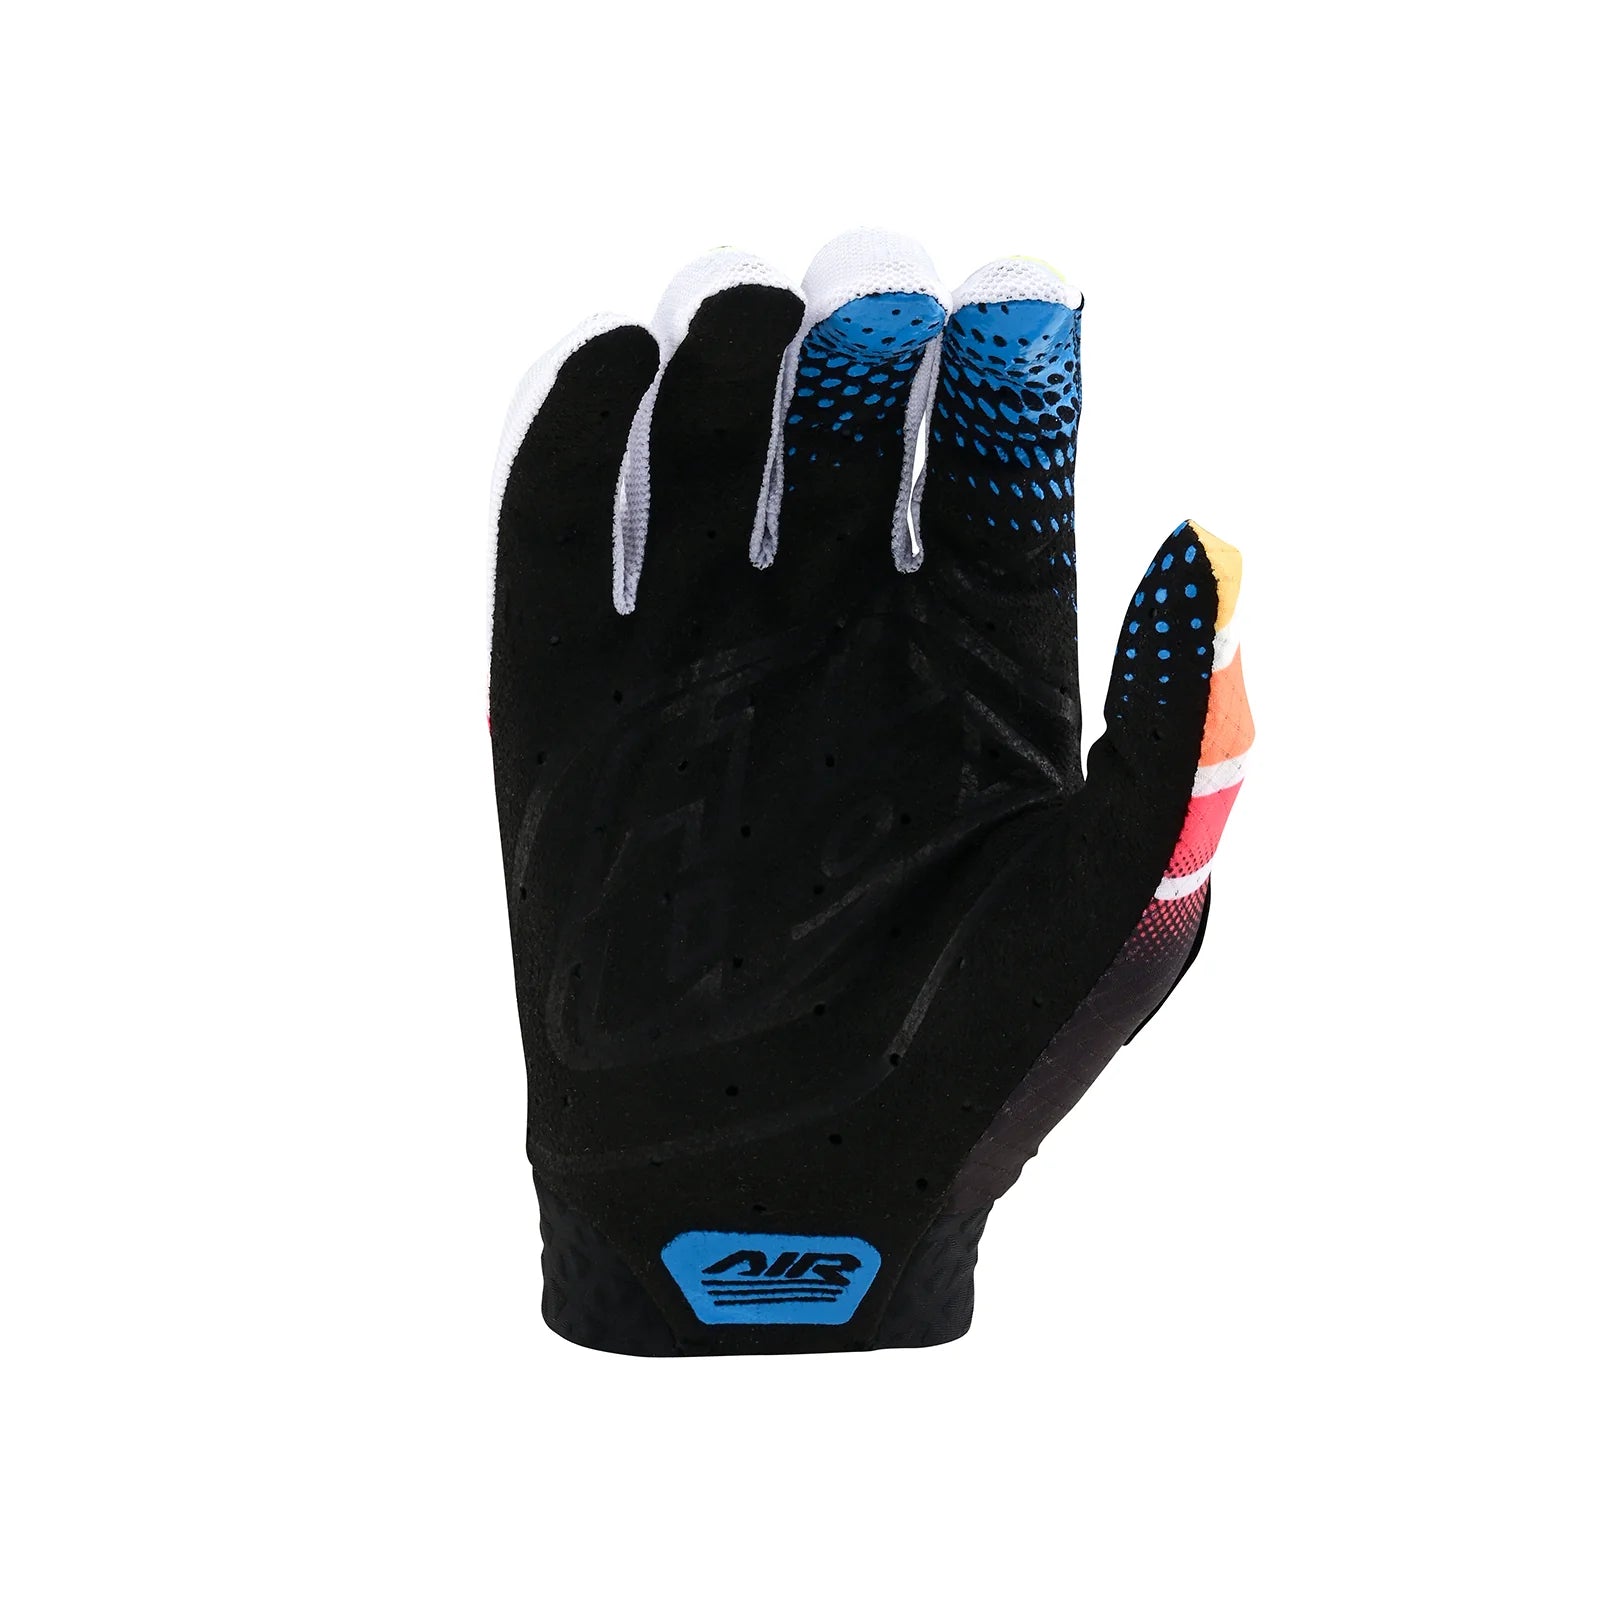 Troy Lee Designs TLD Air Glove Wavez Black/Multi, black and blue cycling glove with grip on the fingers and protective padding on the back of the hand.